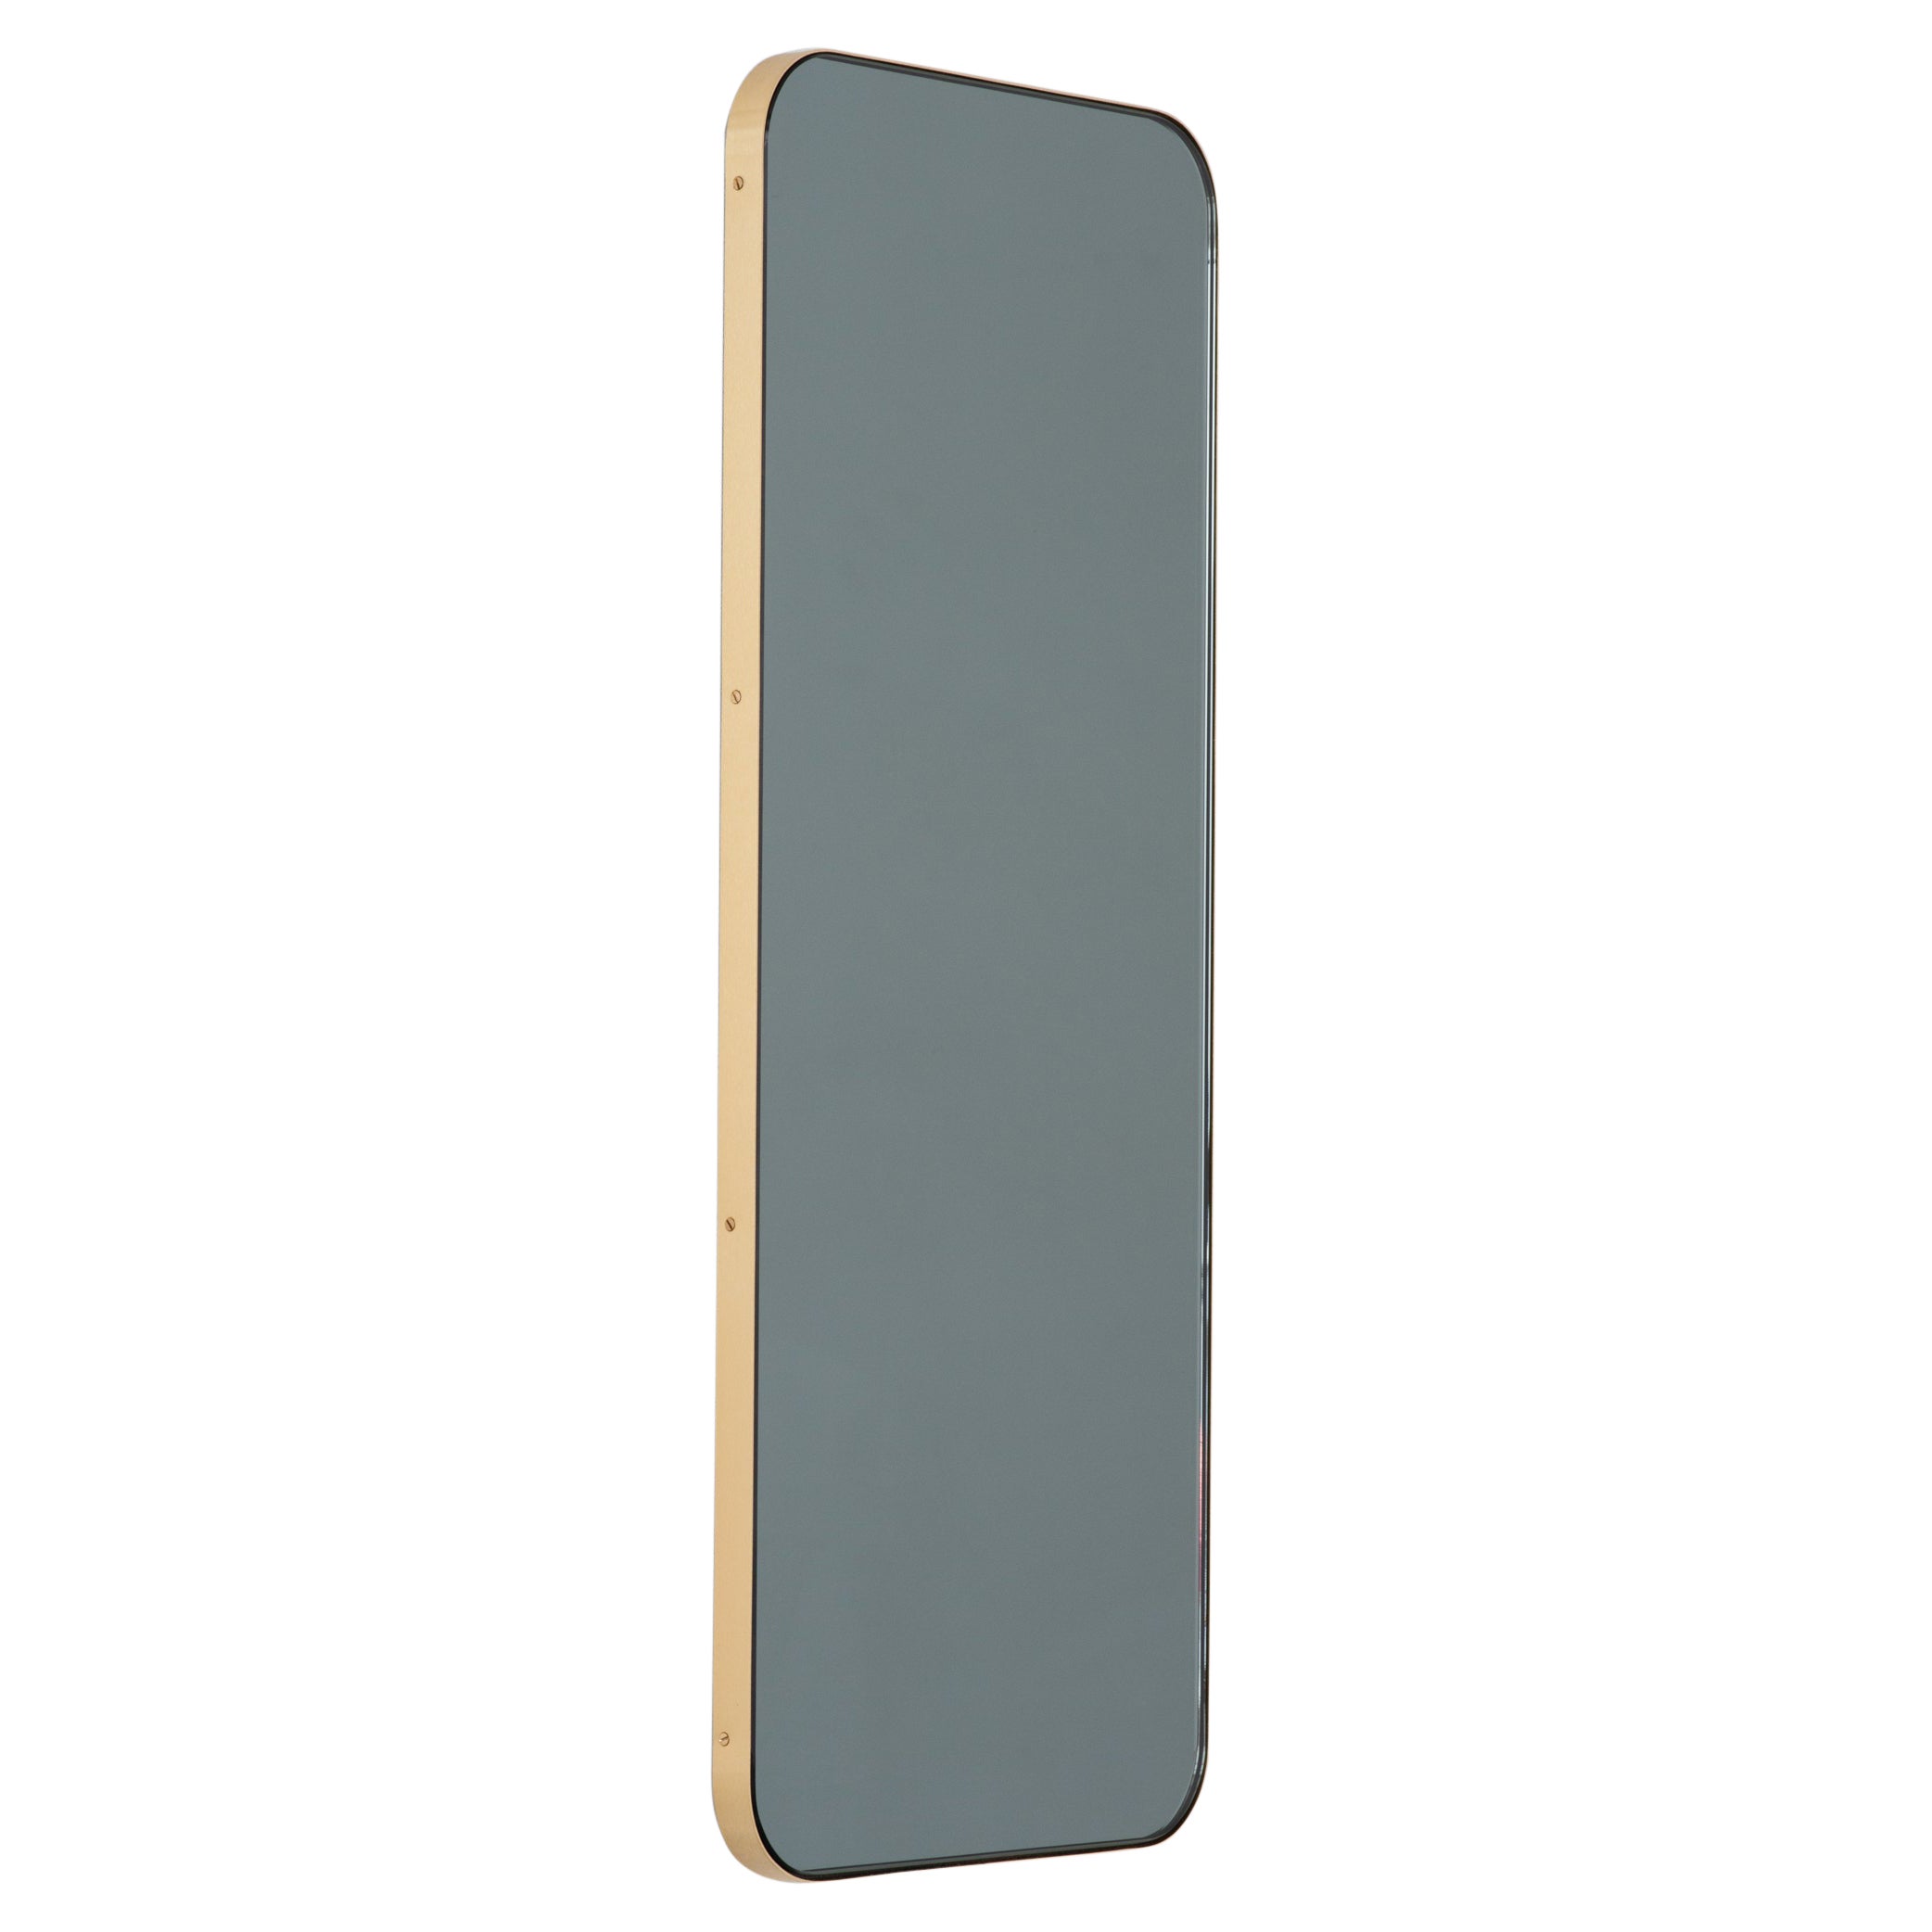 Quadris Black Tinted Rectangular Contemporary Mirror with a Brass Frame, Small For Sale